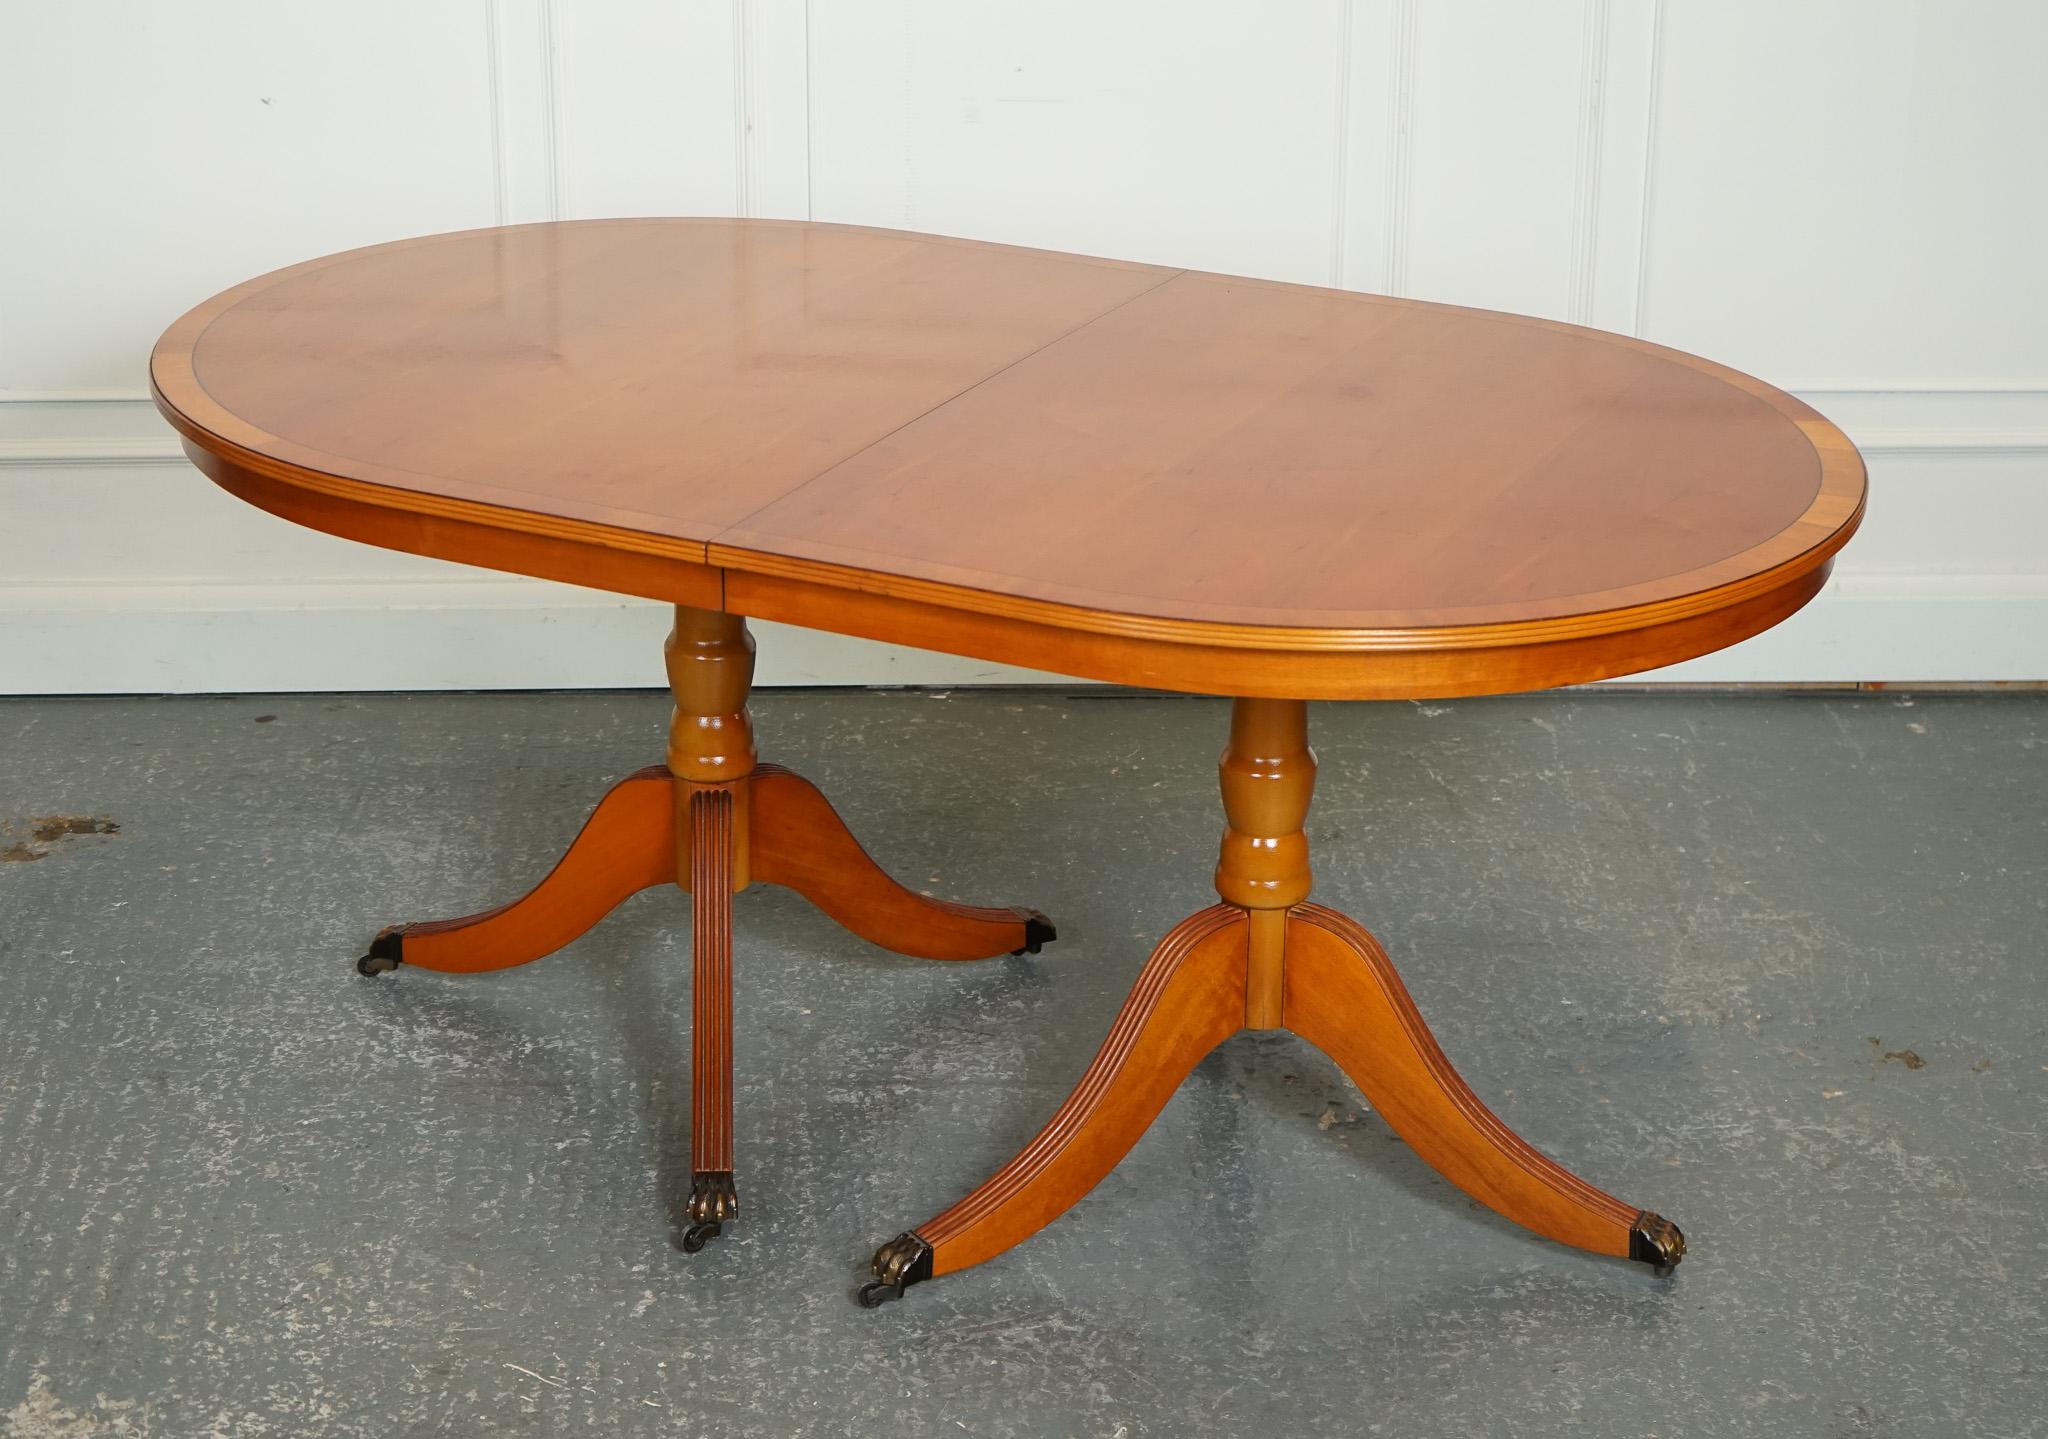 
We are delighted to offer for sale Vintage Twin Pedestal Yew Wood Extending Dining Table.

The vintage twin pedestal yew wood extending dining table is a stunning and functional piece of furniture that can comfortably seat 6 to 8 people. It is made